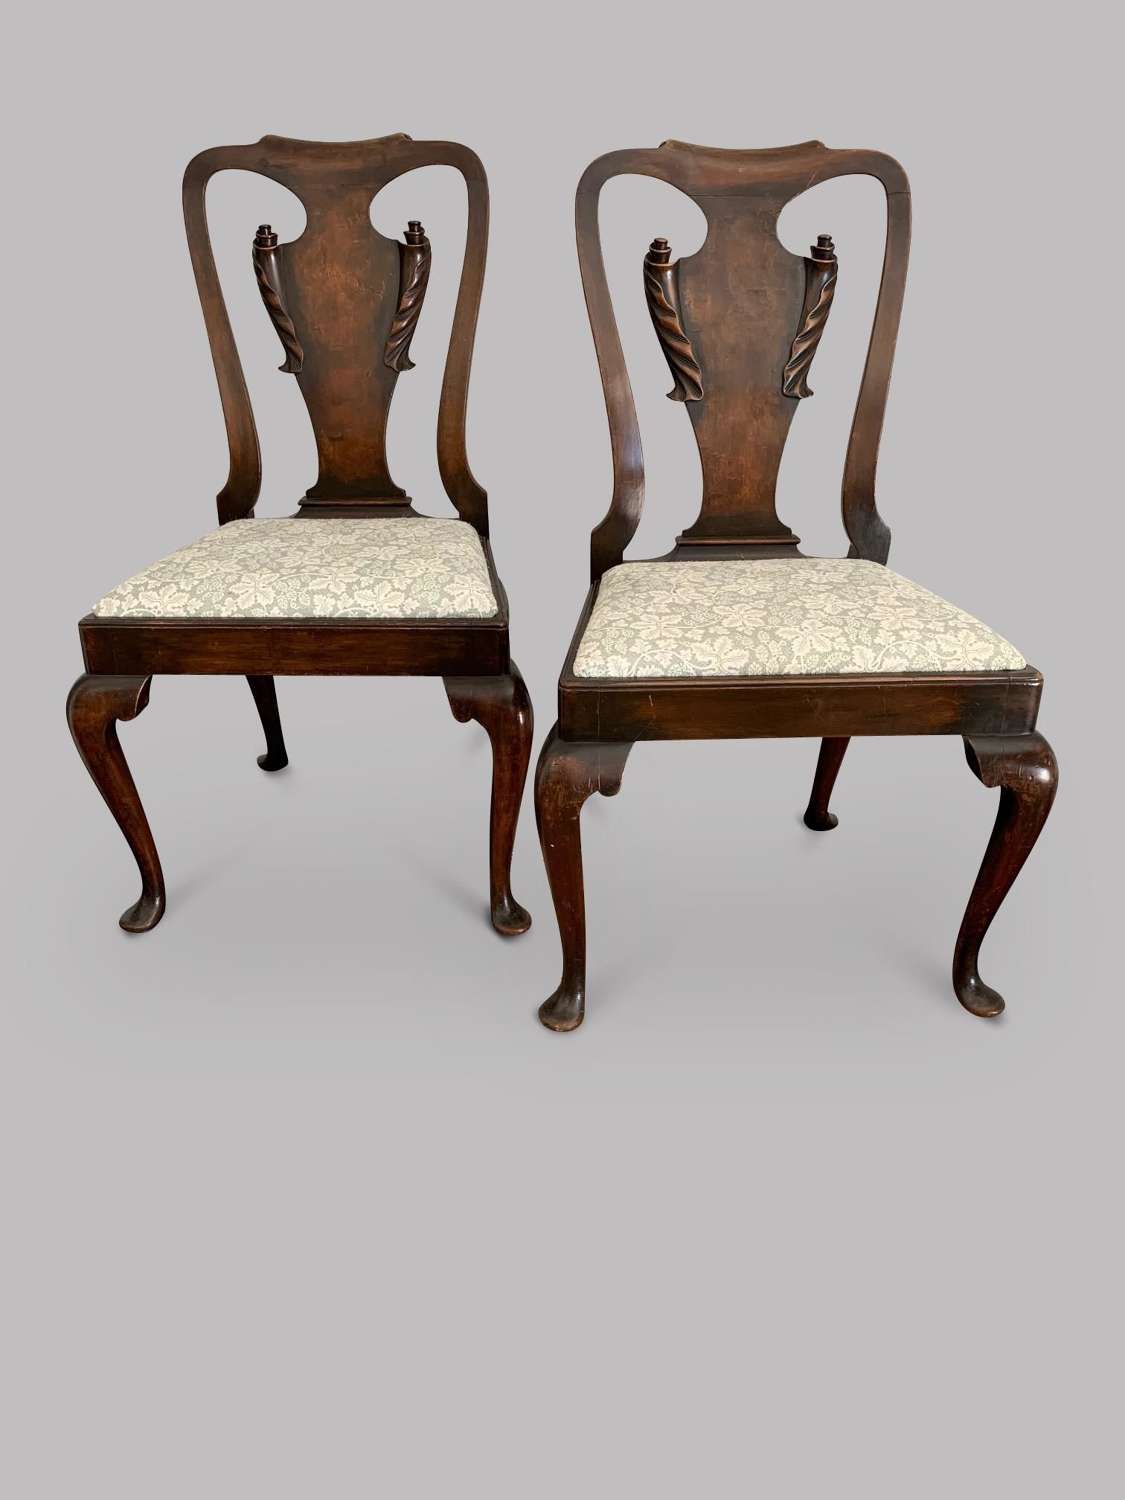 Attractive Pair of Georgian Chairs